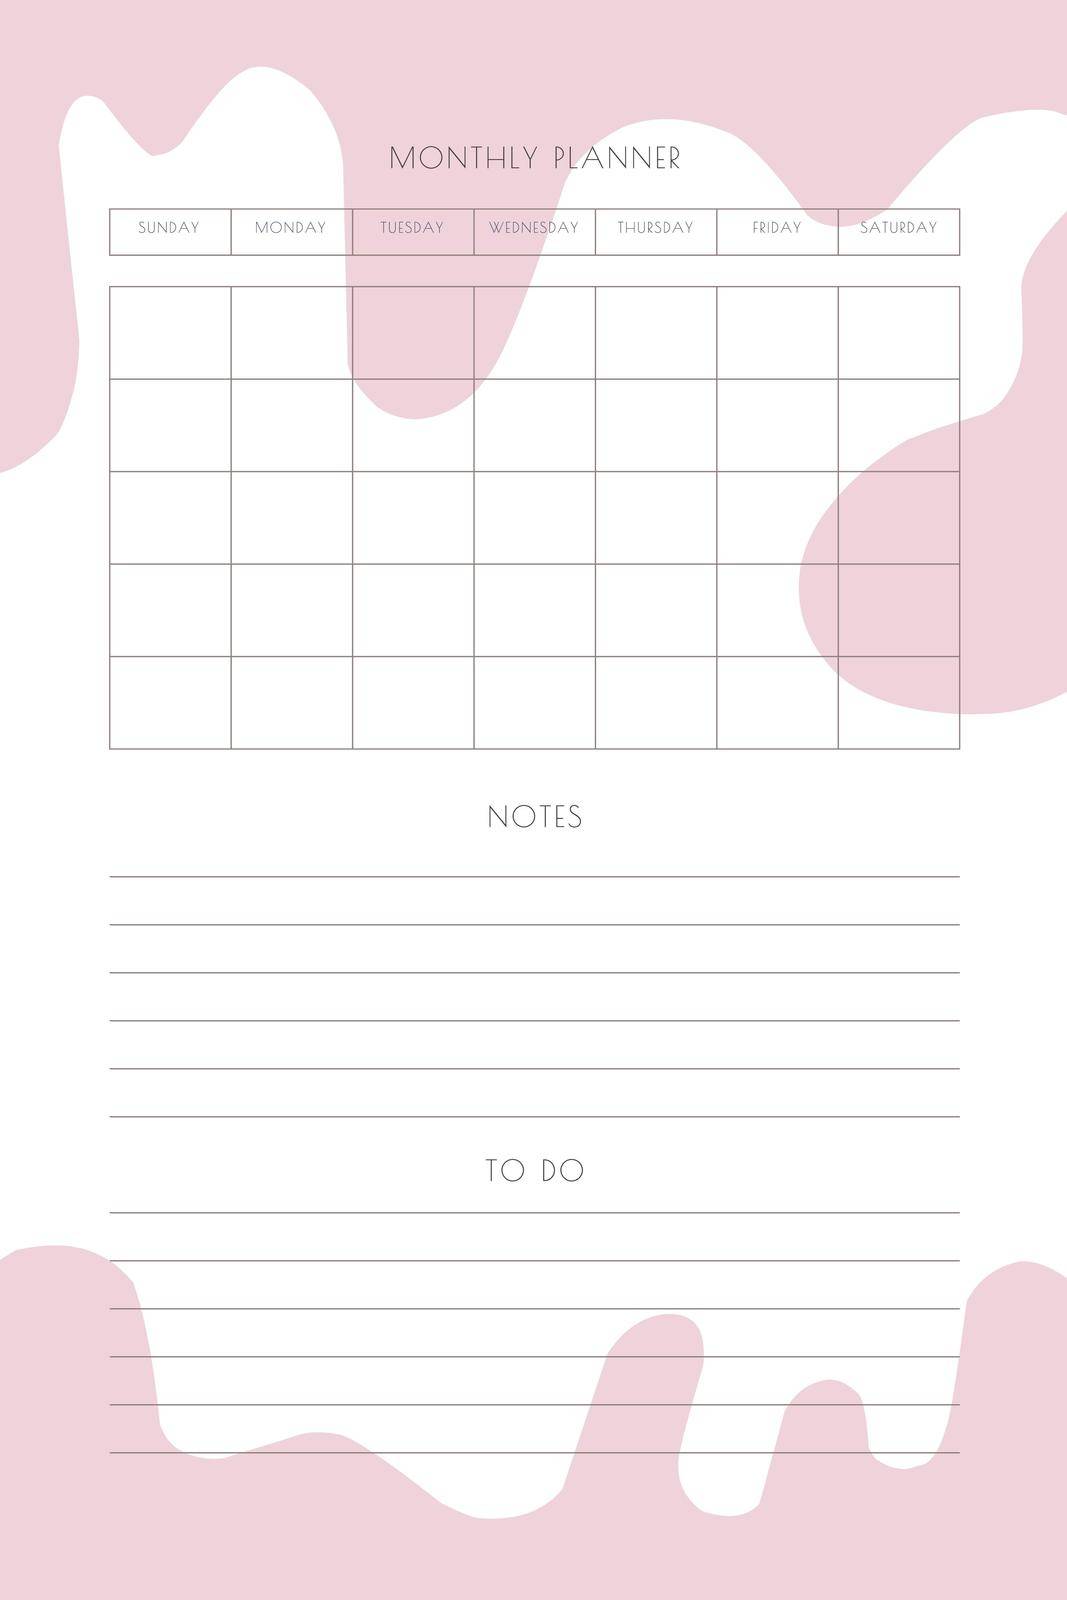 organizer daily weekly monthly planner to do list with delicate minimalist design by MariaTem